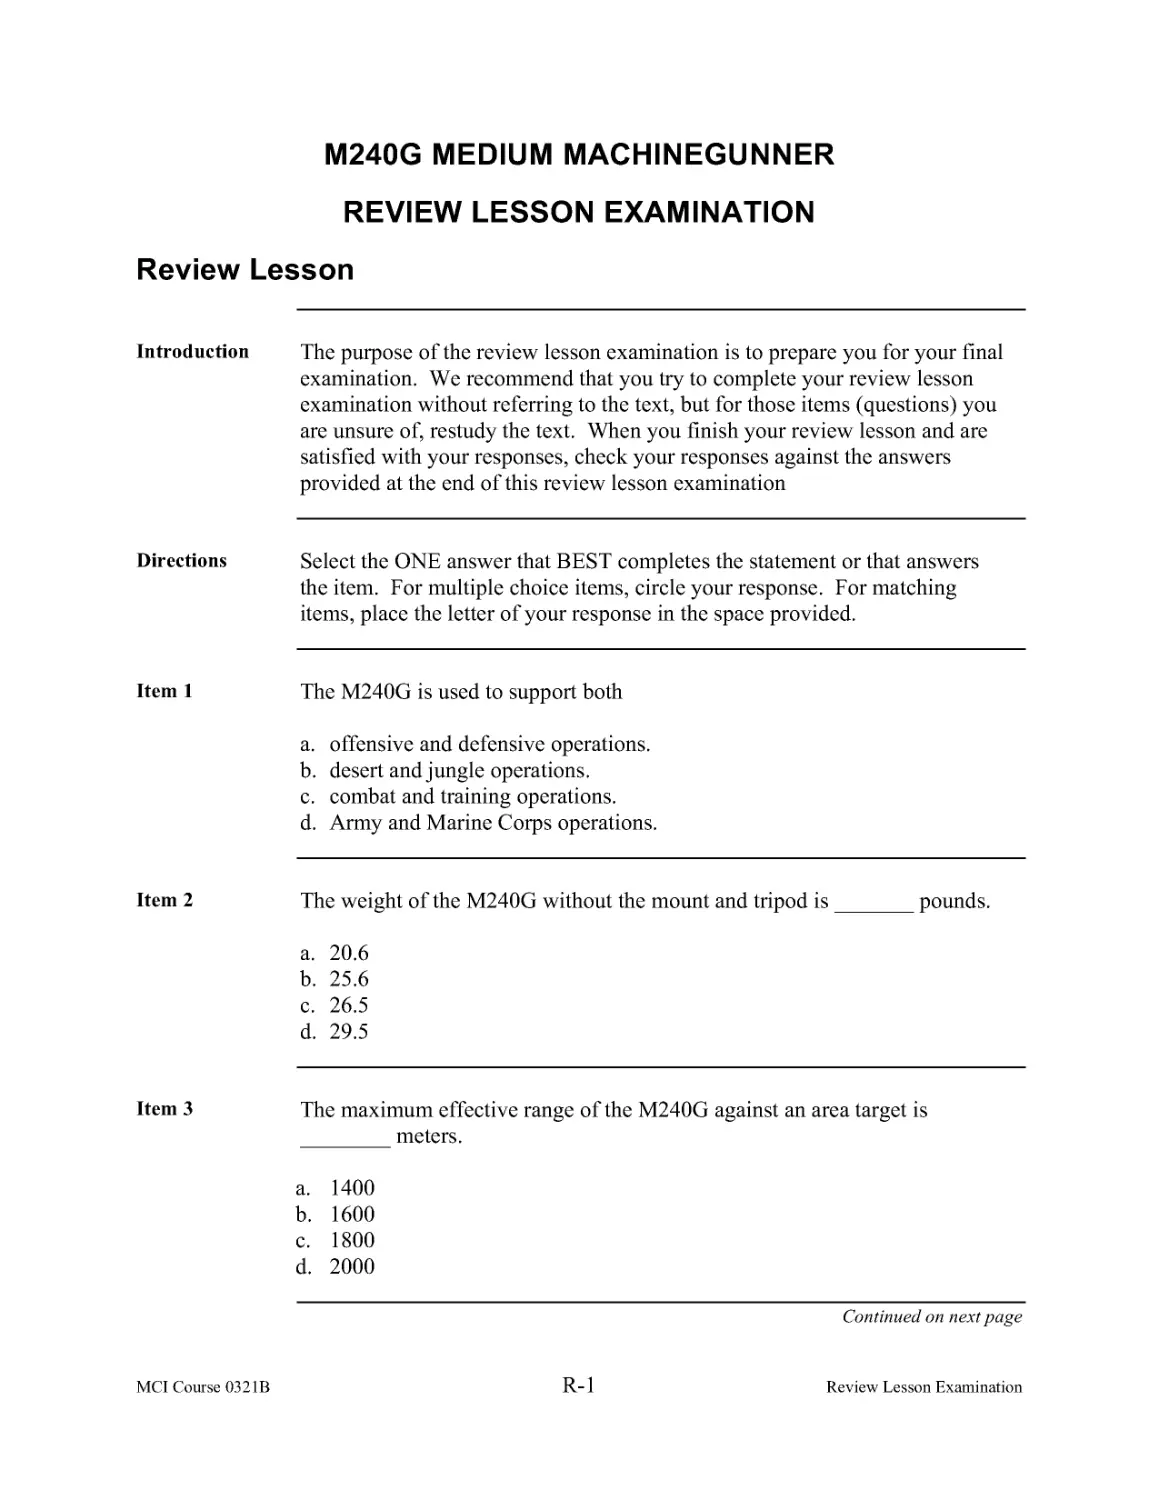 Review Lesson Examination